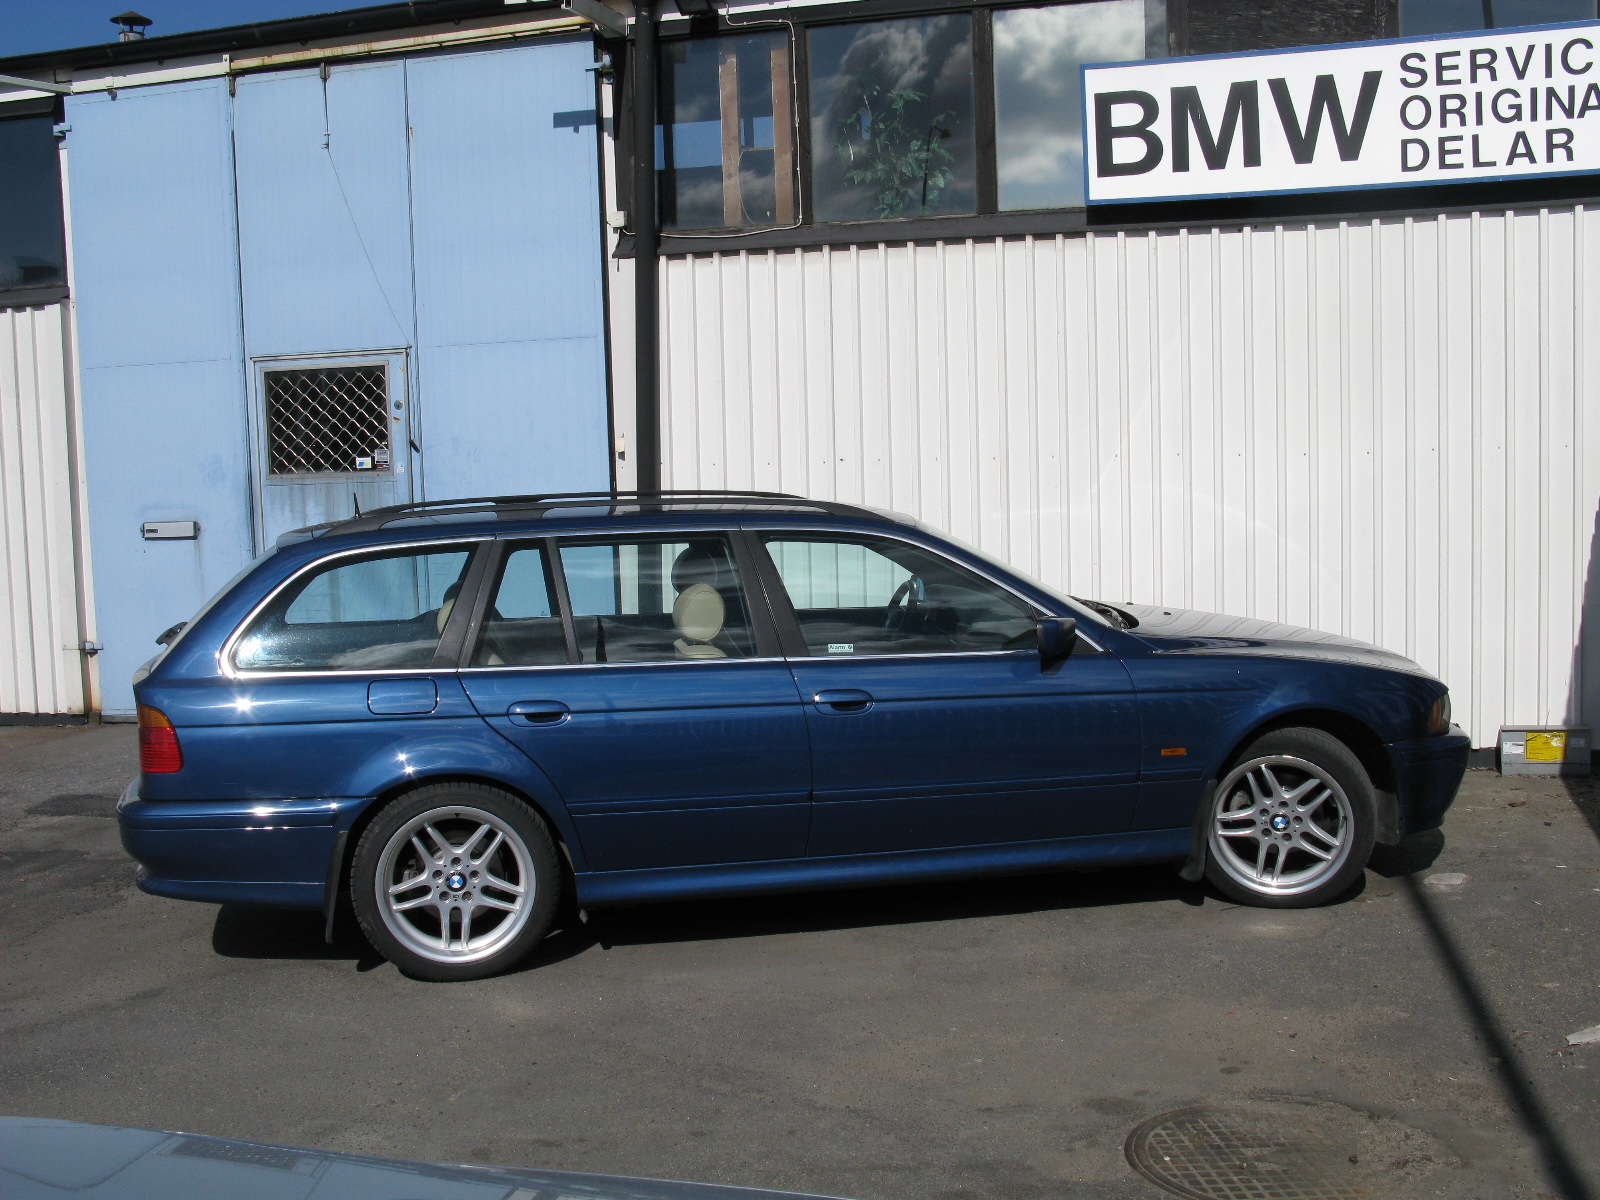 BMW 5 Series Touring E39 | Flickr - Photo Sharing!